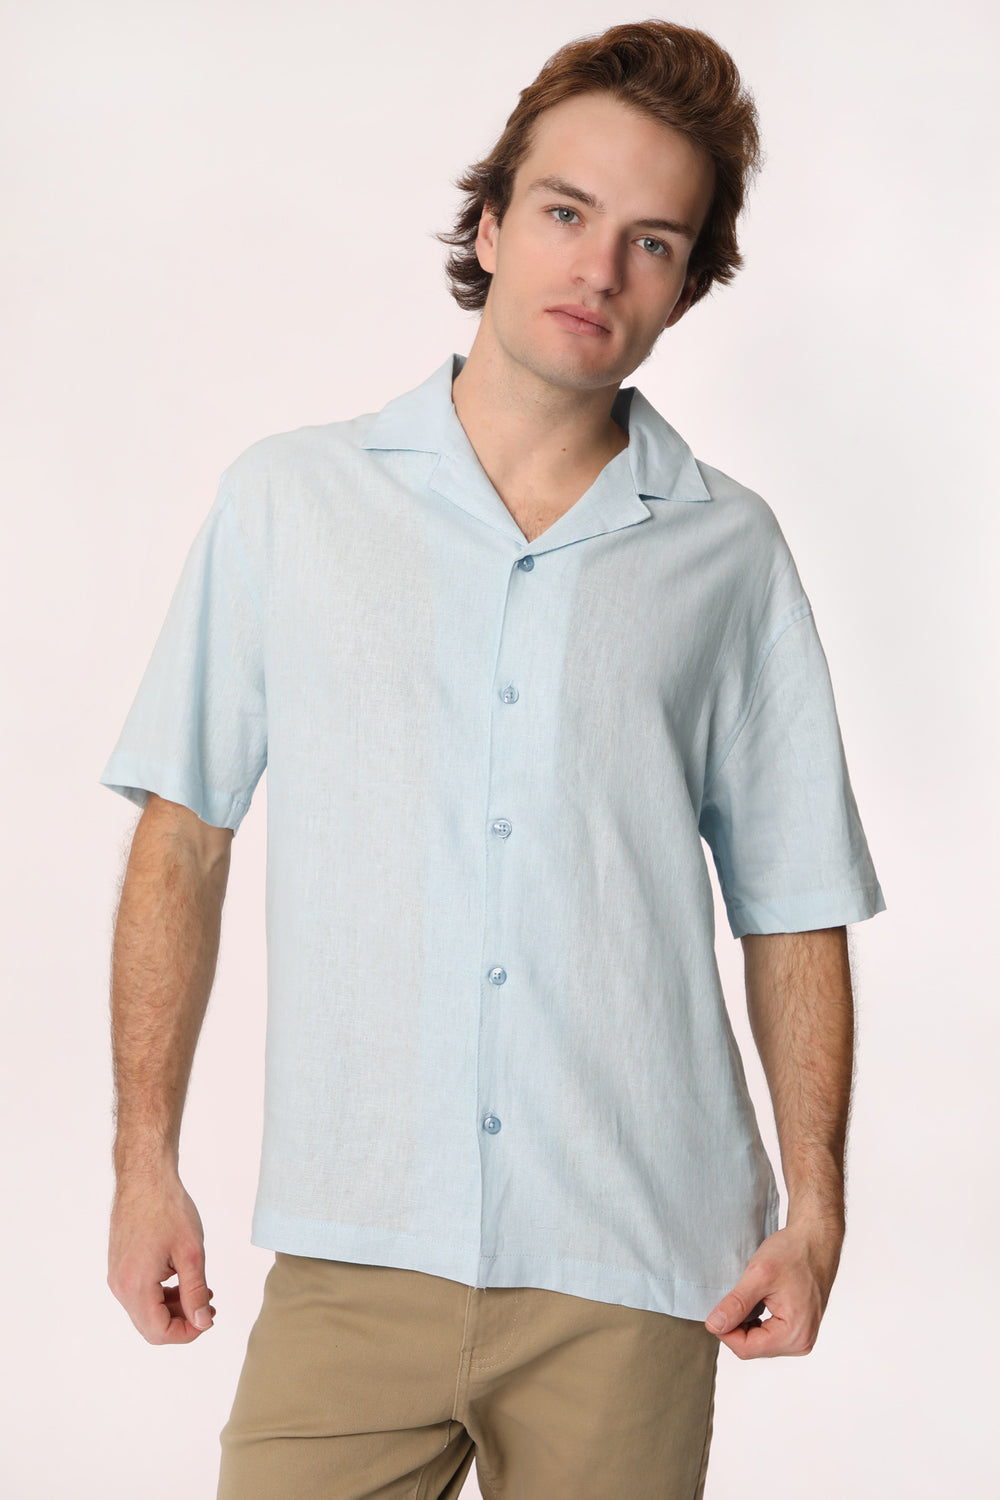 West49 Mens Linen Button-Up West49 Mens Linen Button-Up